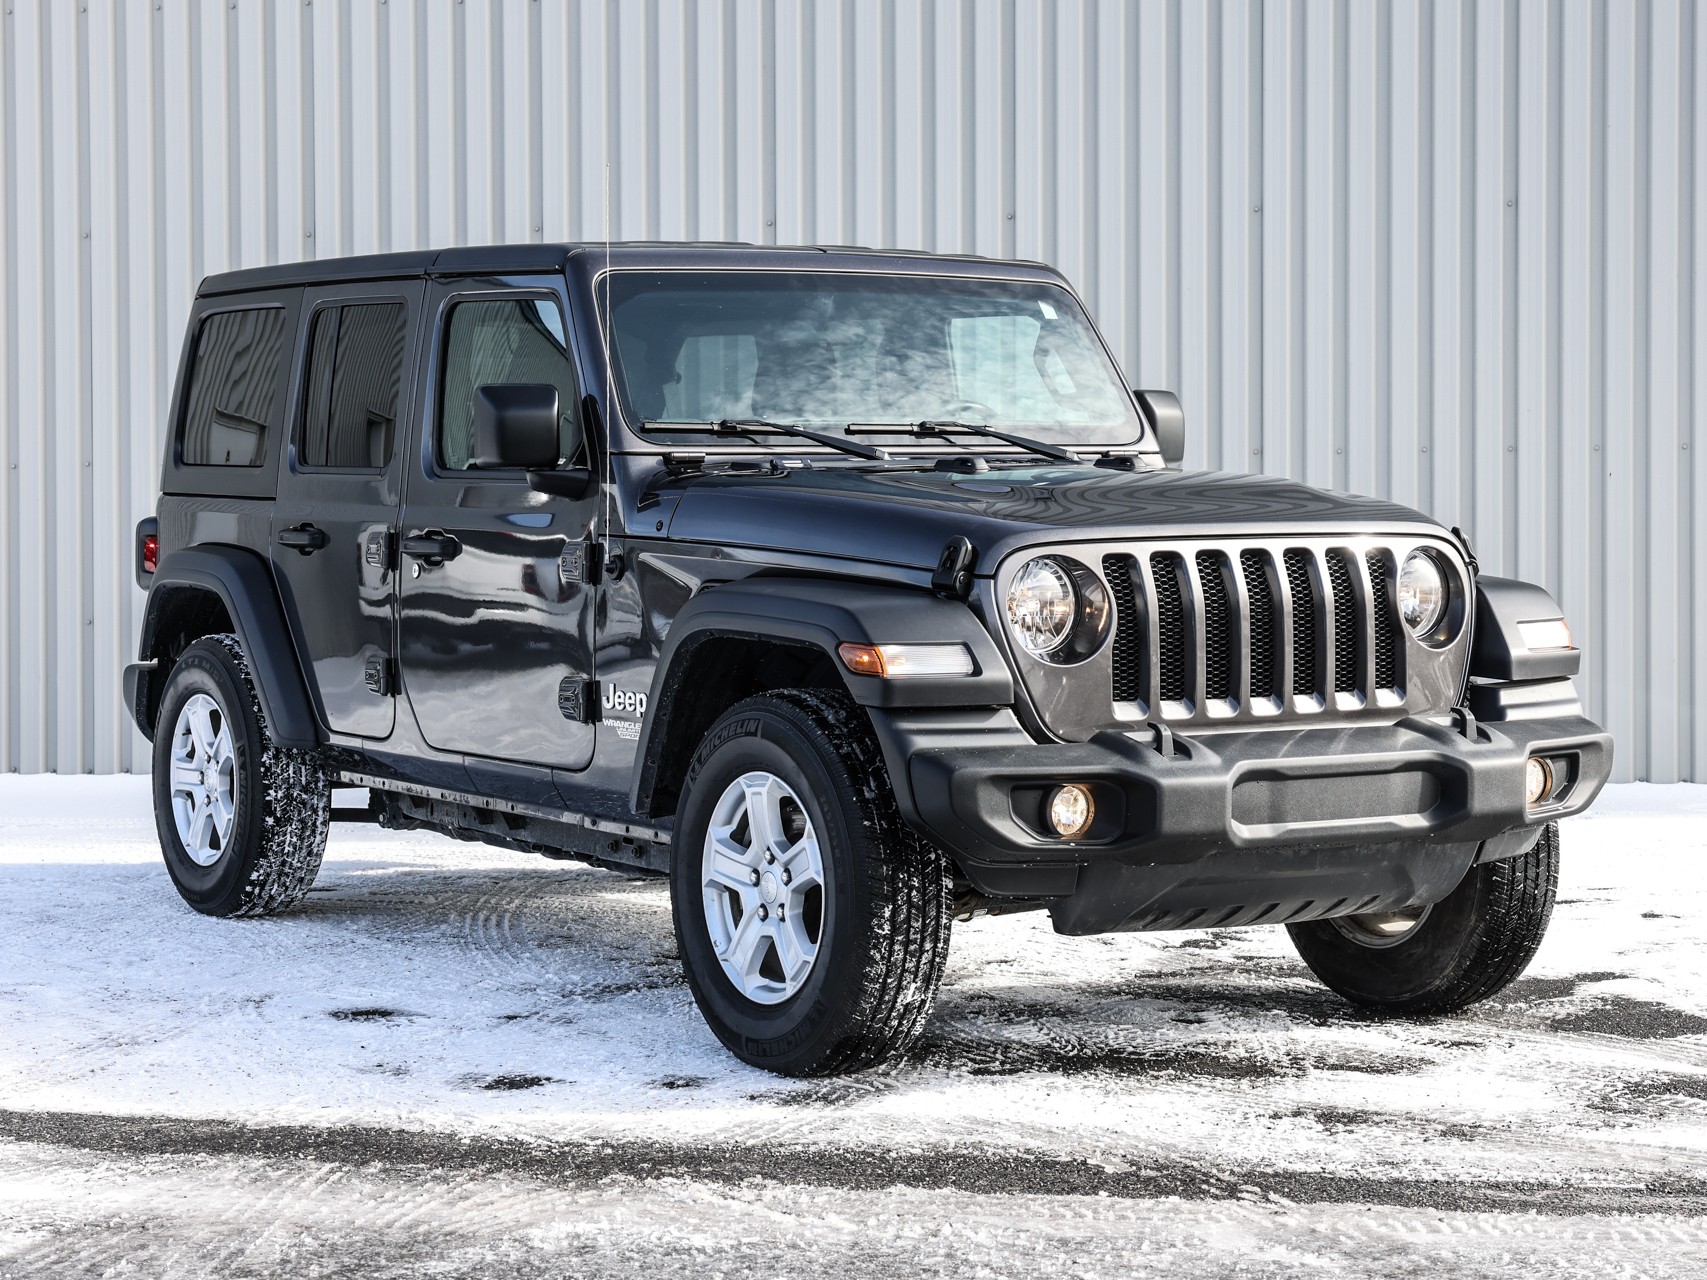 Used 2021 Jeep Wrangler with 63,969 km for sale at Otogo